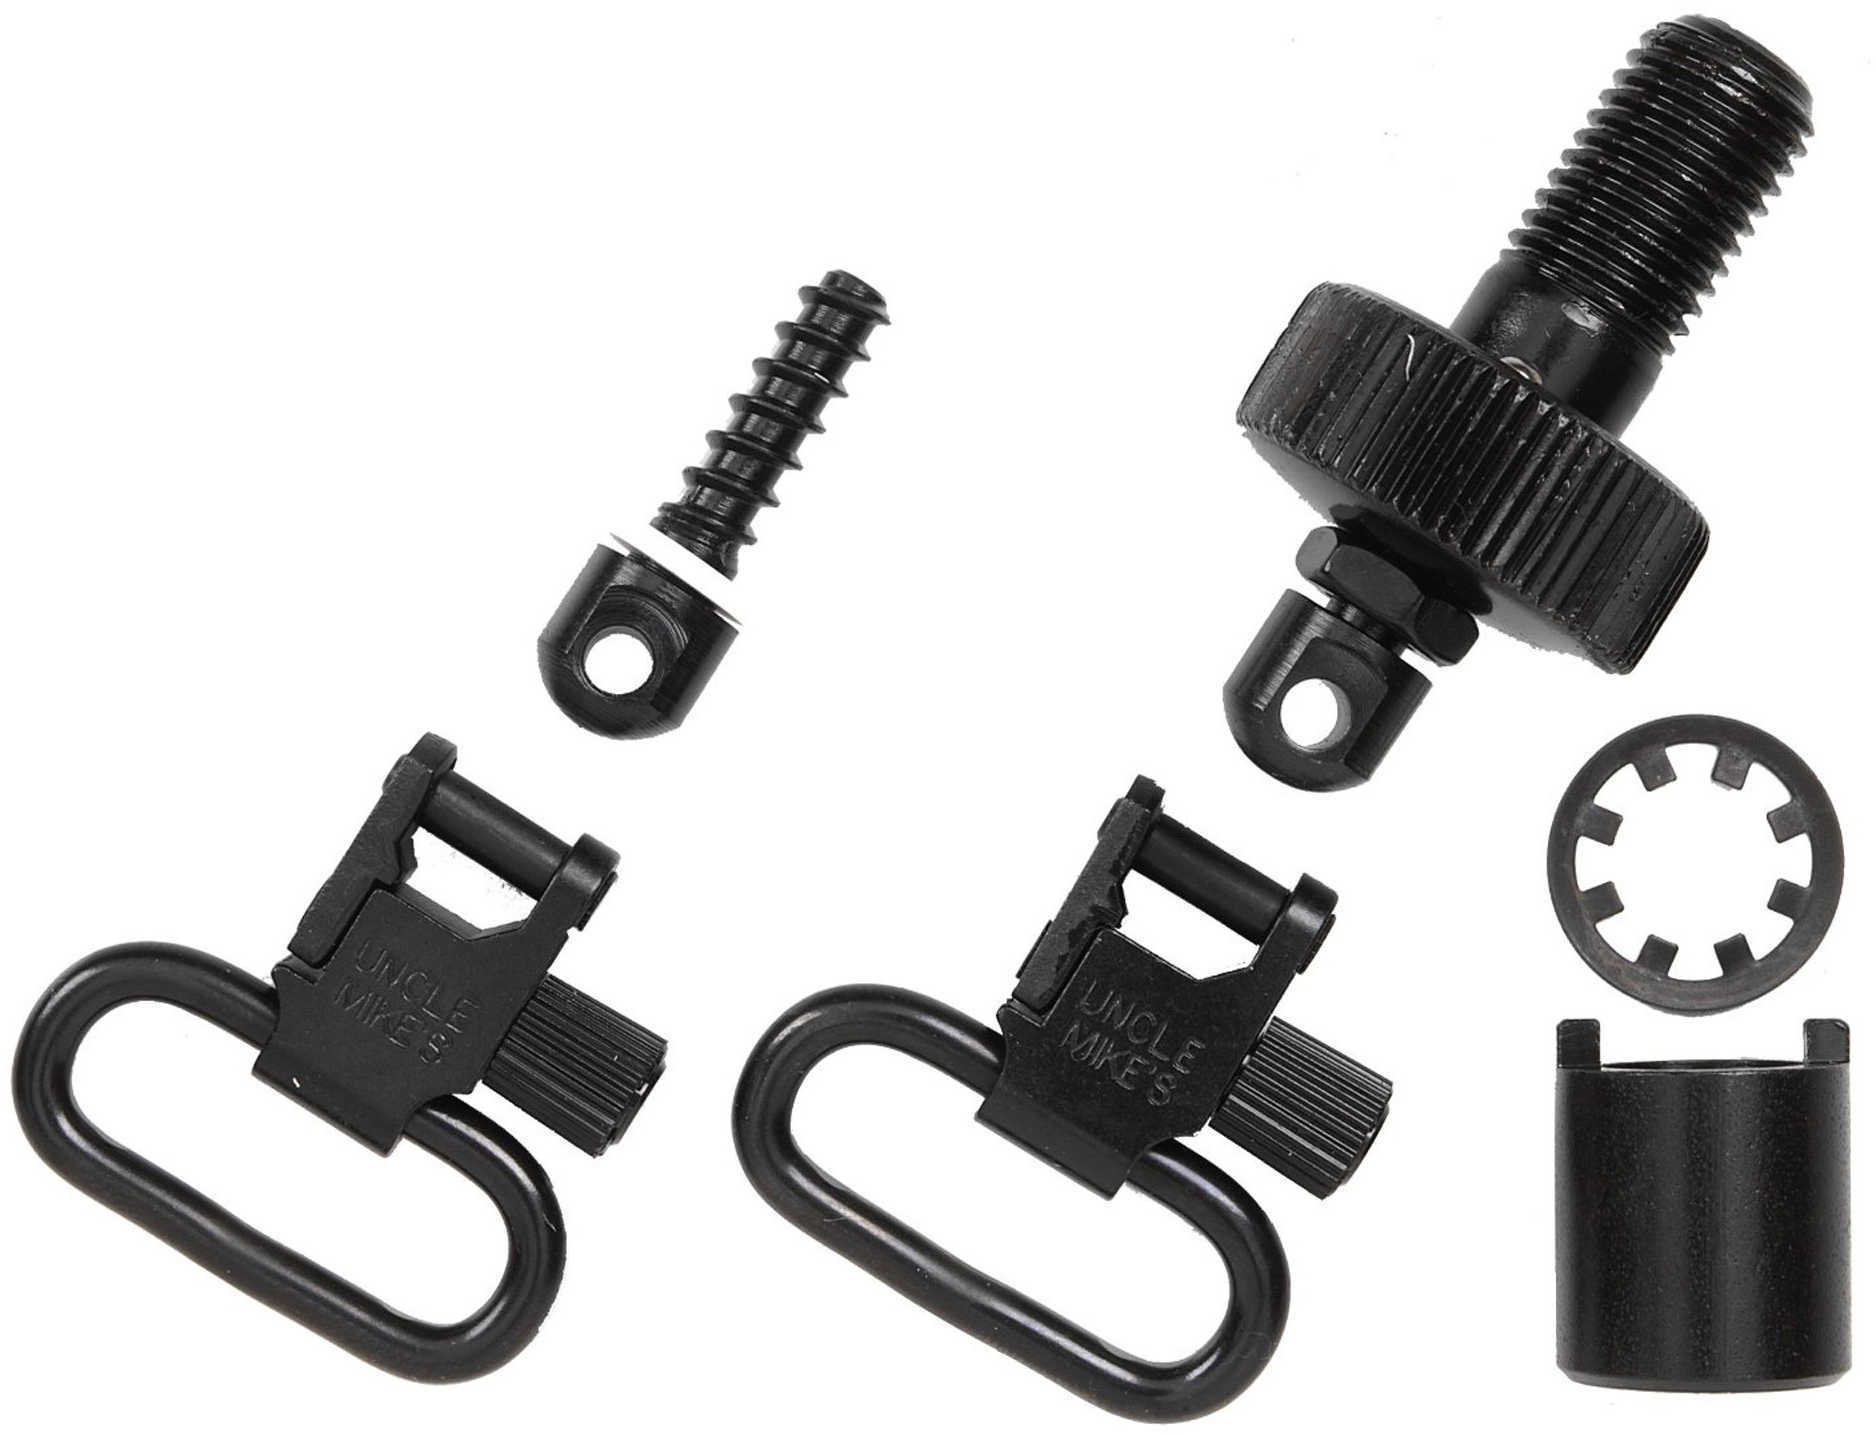 Uncle Mikes Shotgun Swivels For Moss 500 12Ga